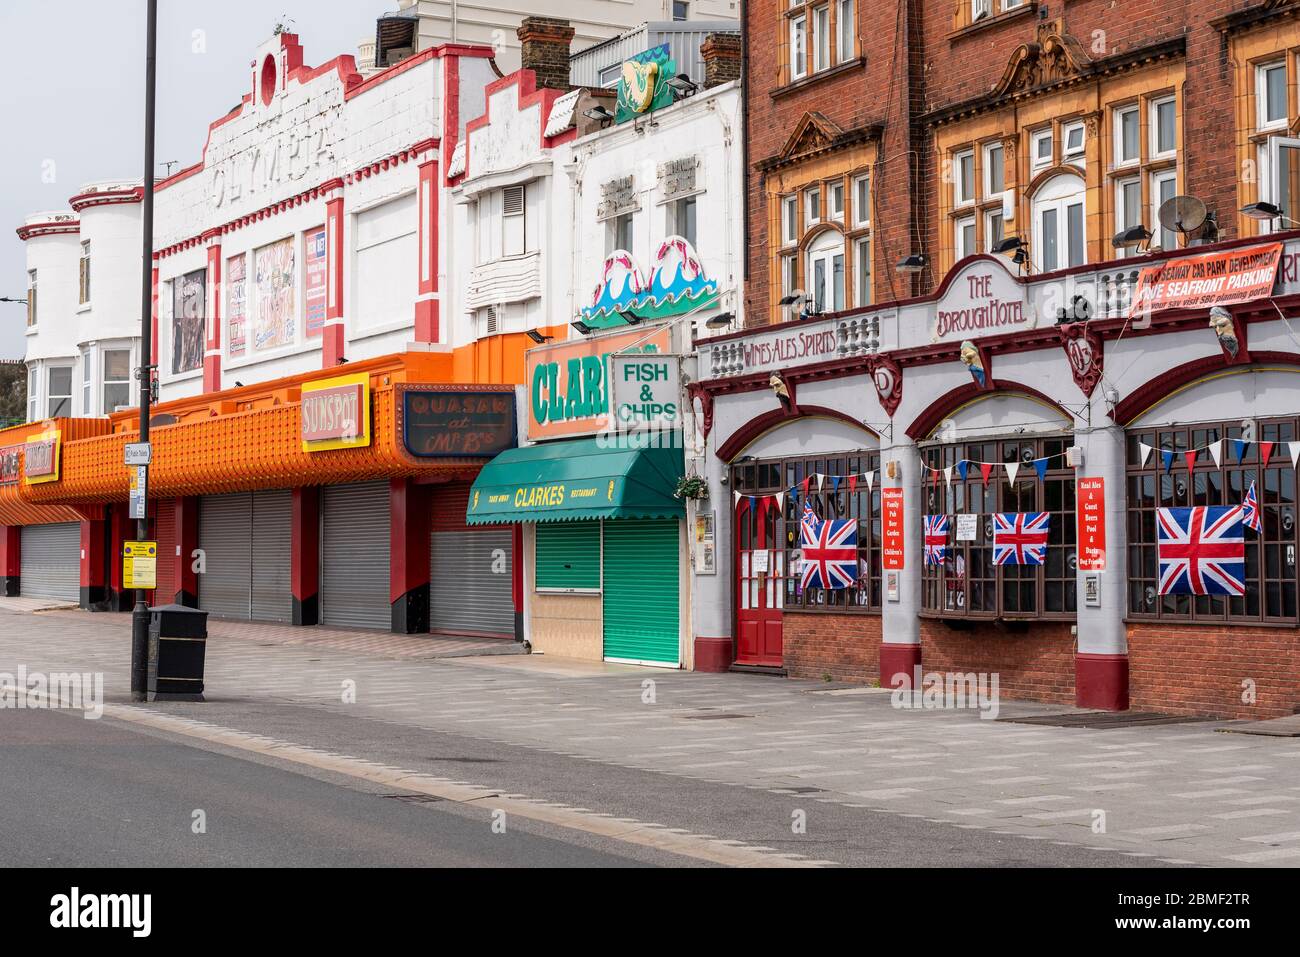 Closed businesses on sunny day in Southend on VE Day Bank Holiday during COVID-19 Coronavirus pandemic lockdown period. Shut amusement arcade. British Stock Photo